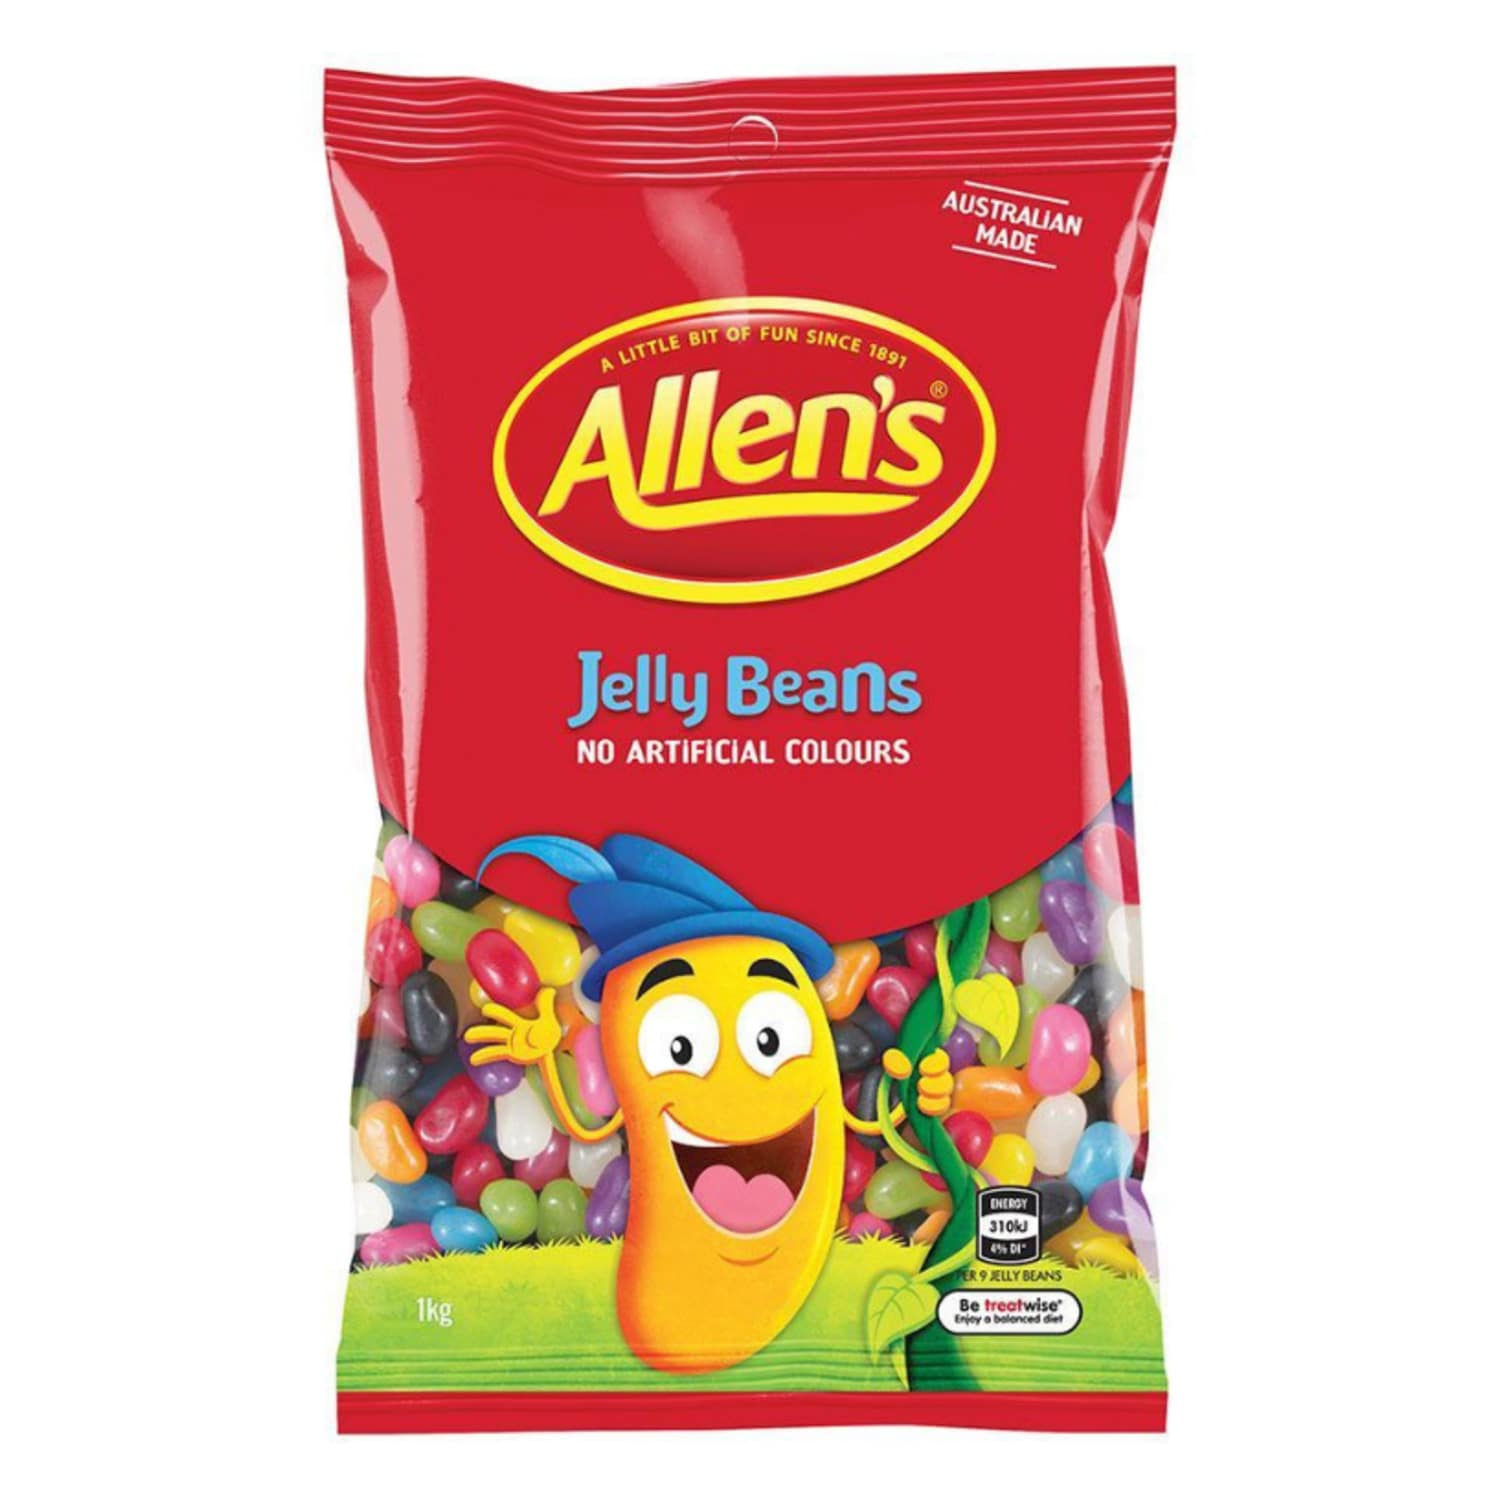 Allens Jelly Beans 1 Kg